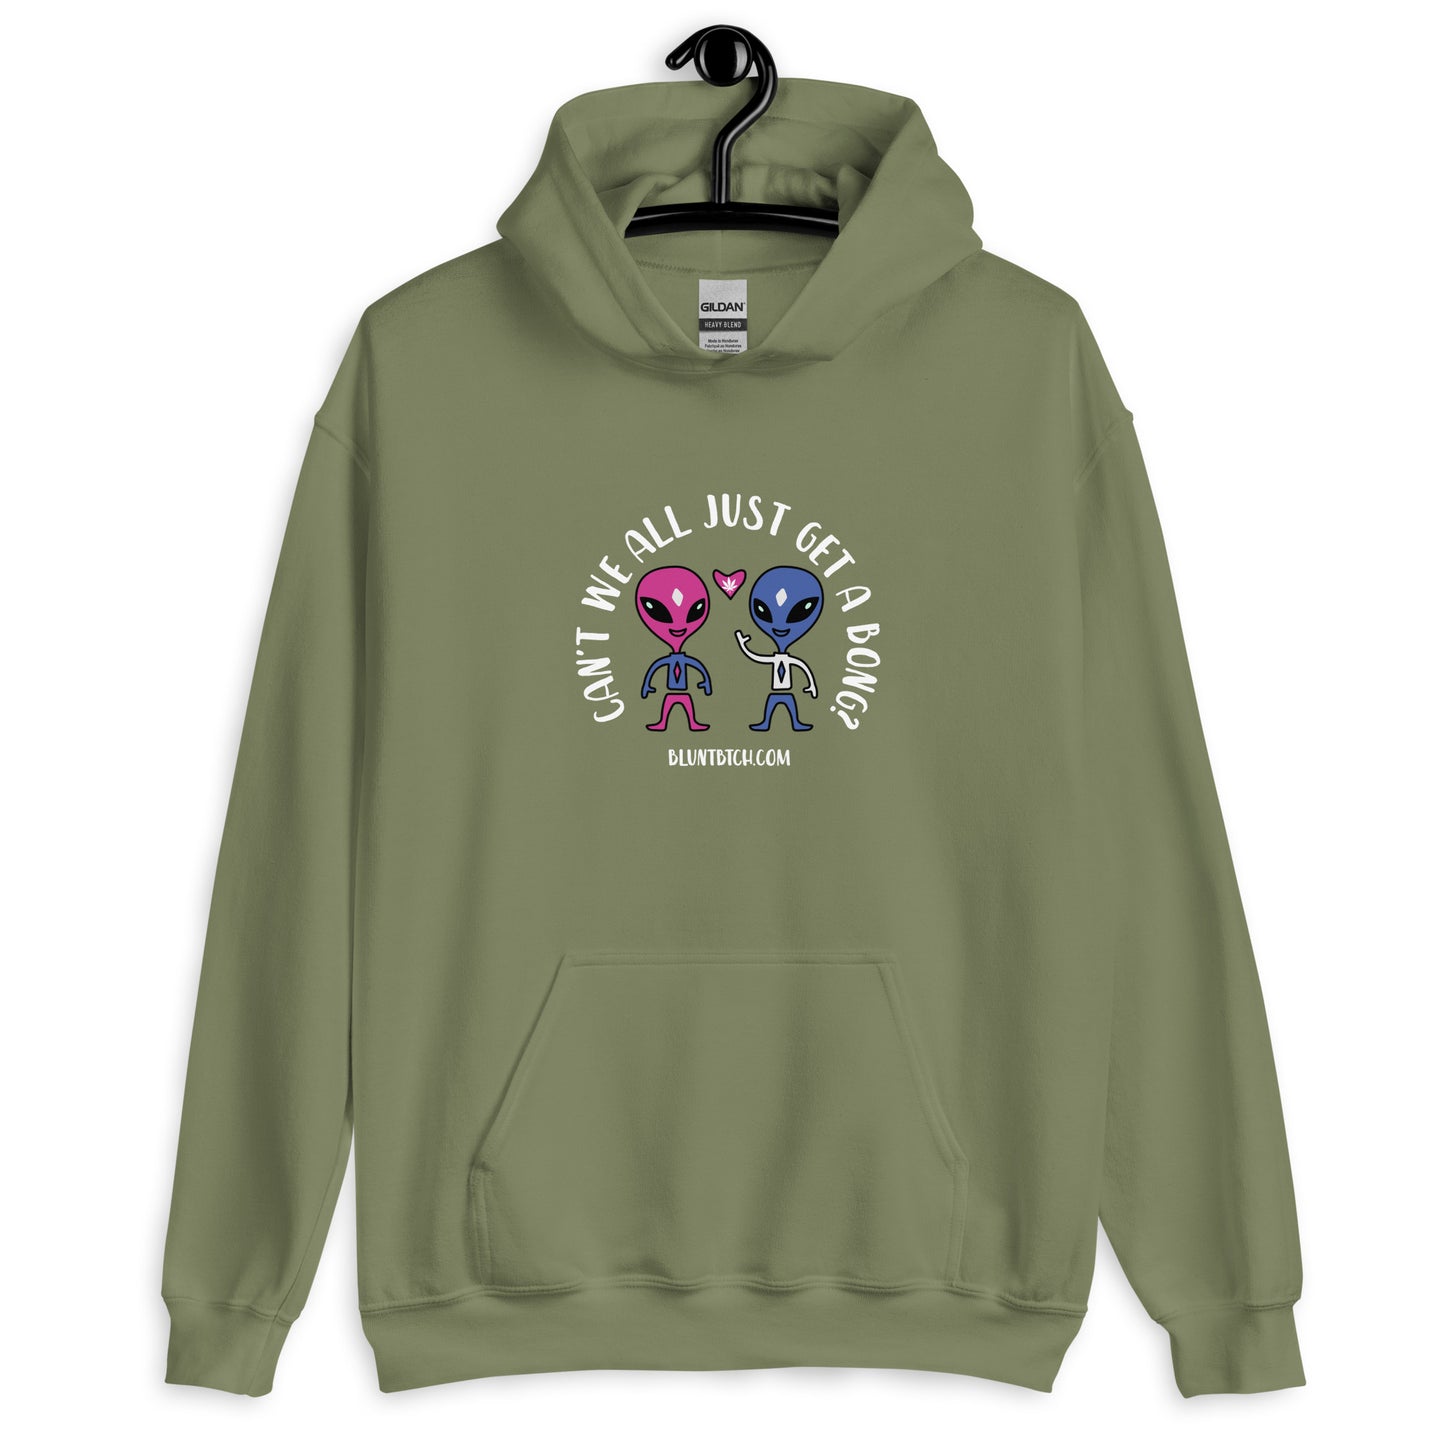 Can't We All Just Get A Bong 420 Hoodie, Stoner Sweatshirt, Gifts for stoners